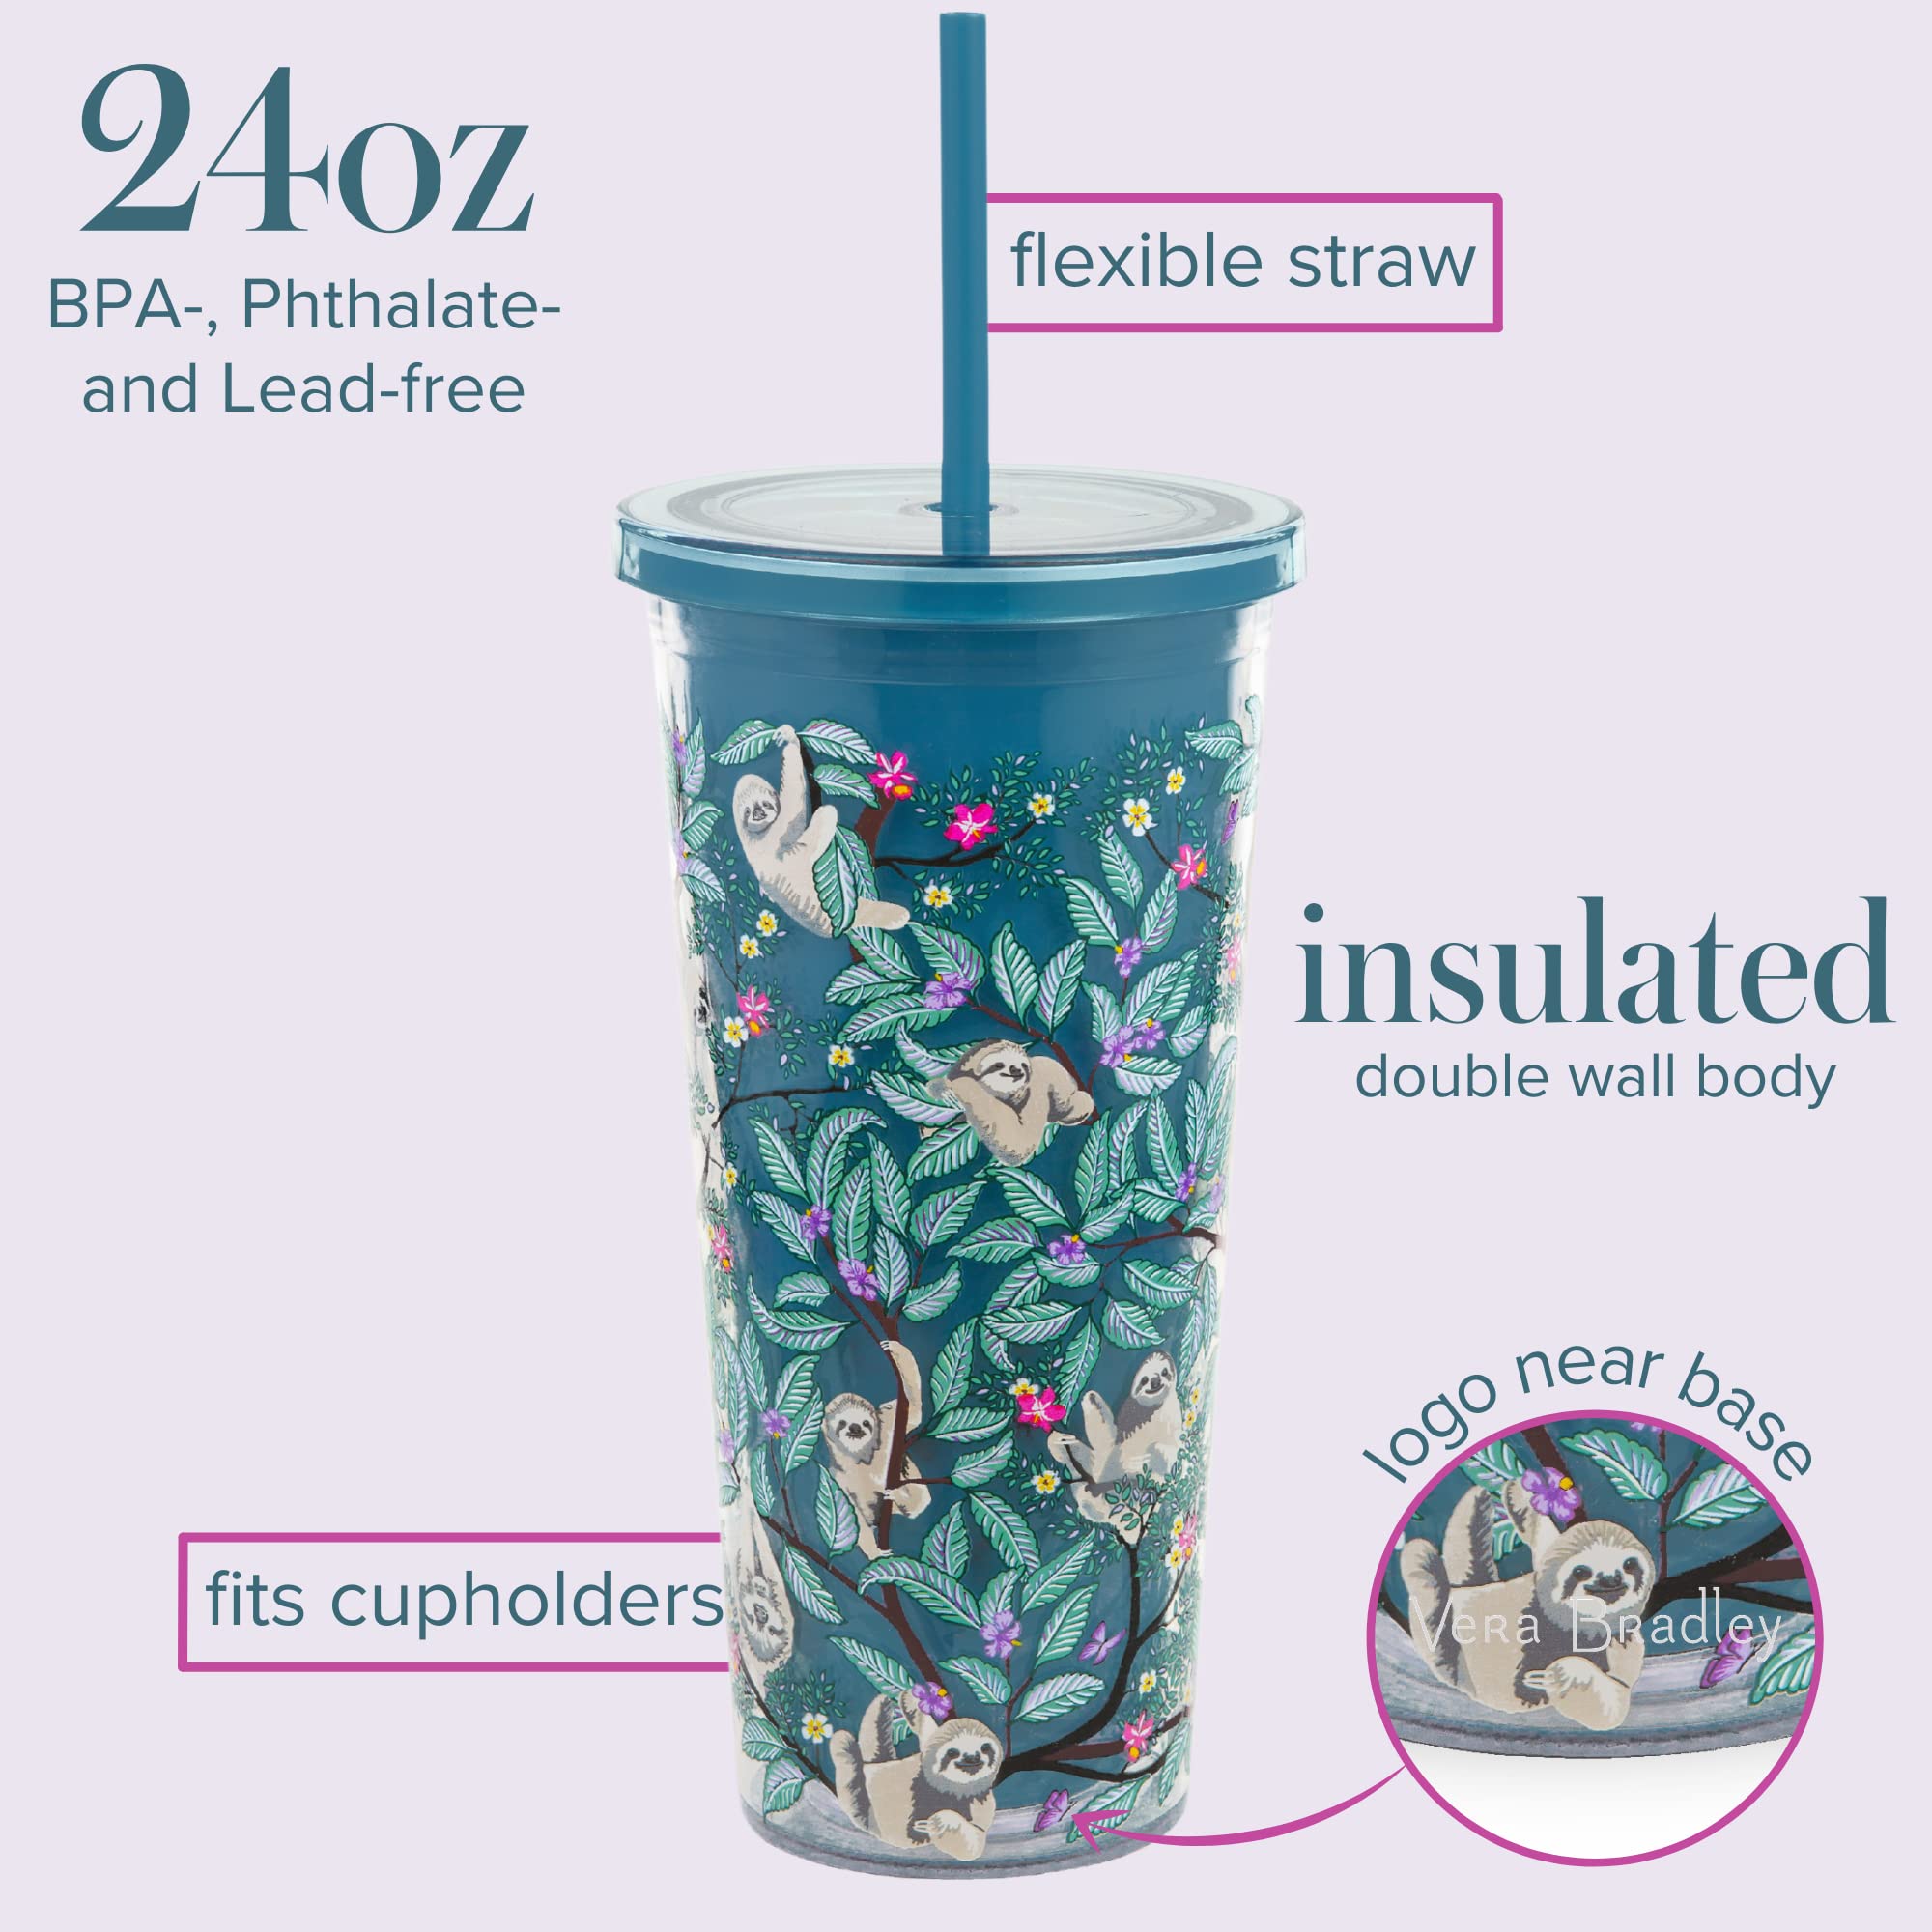 Vera Bradley Travel Tumbler with Lid and Straw, 24 Ounce Insulated Cup, Plastic Double Wall Tumbler, Hanging Around (Sloths)